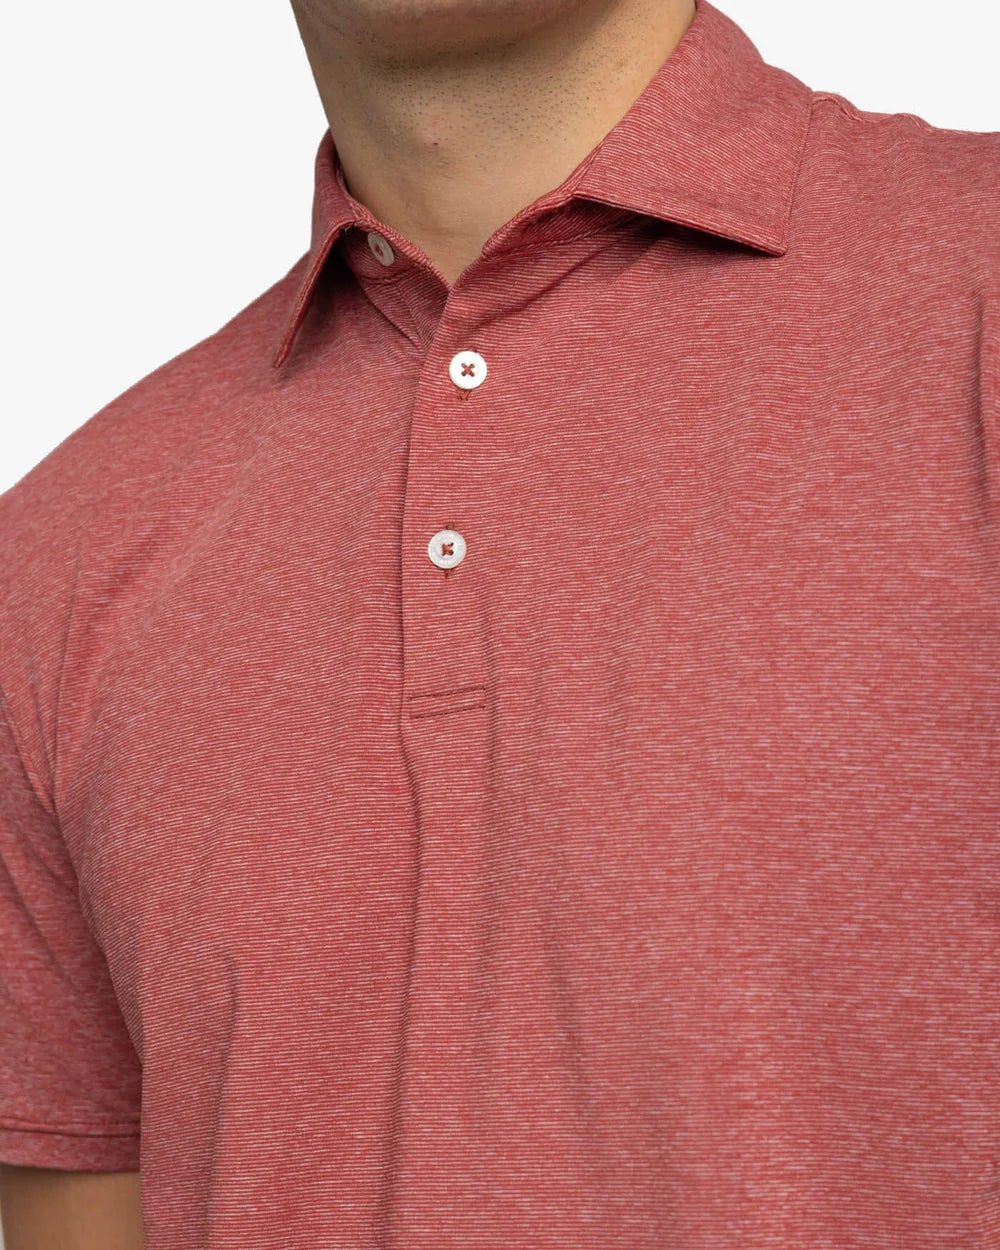 Southern Tide Brreeze Performance Polo - Heather Tuscany Red